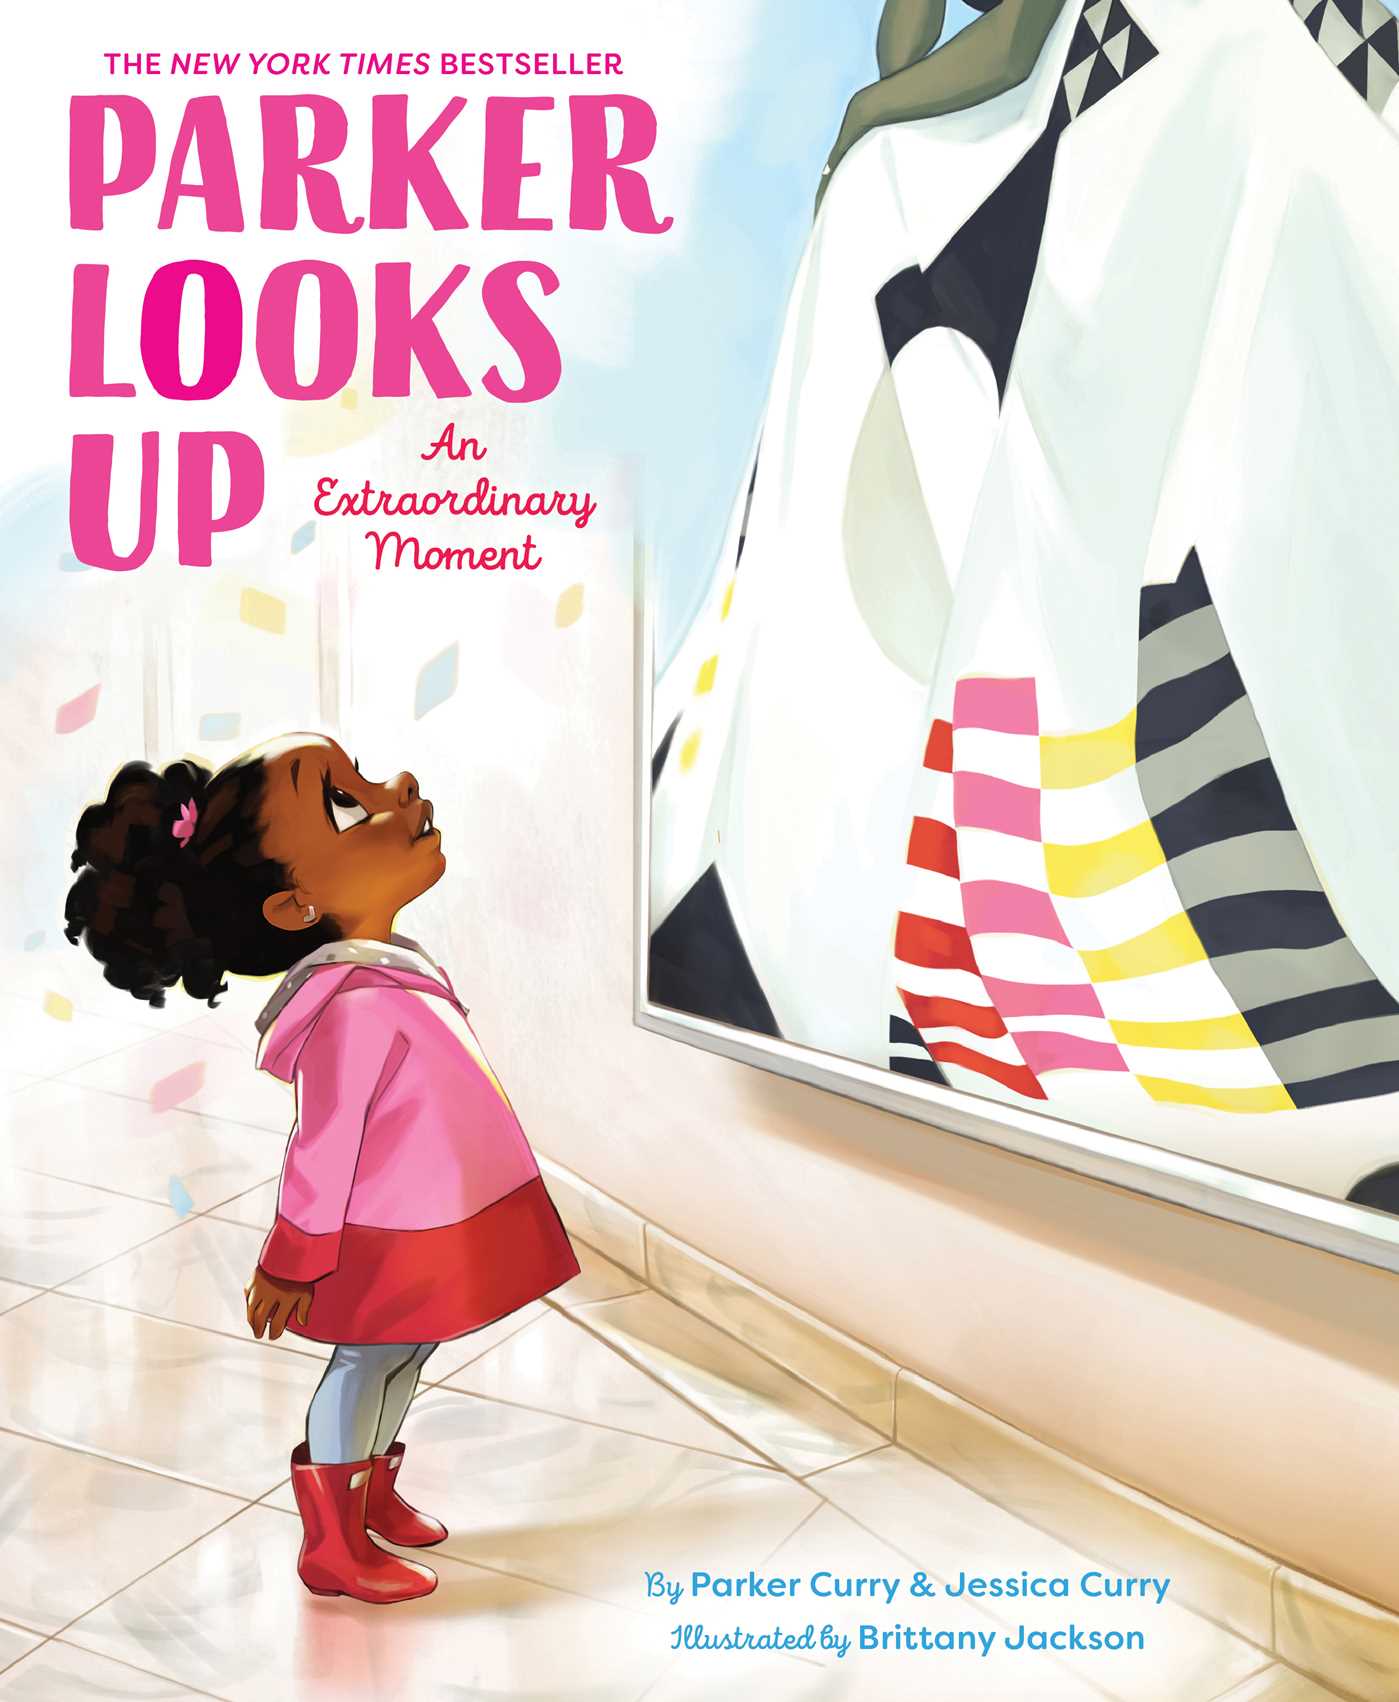 Image for "Parker Looks Up"